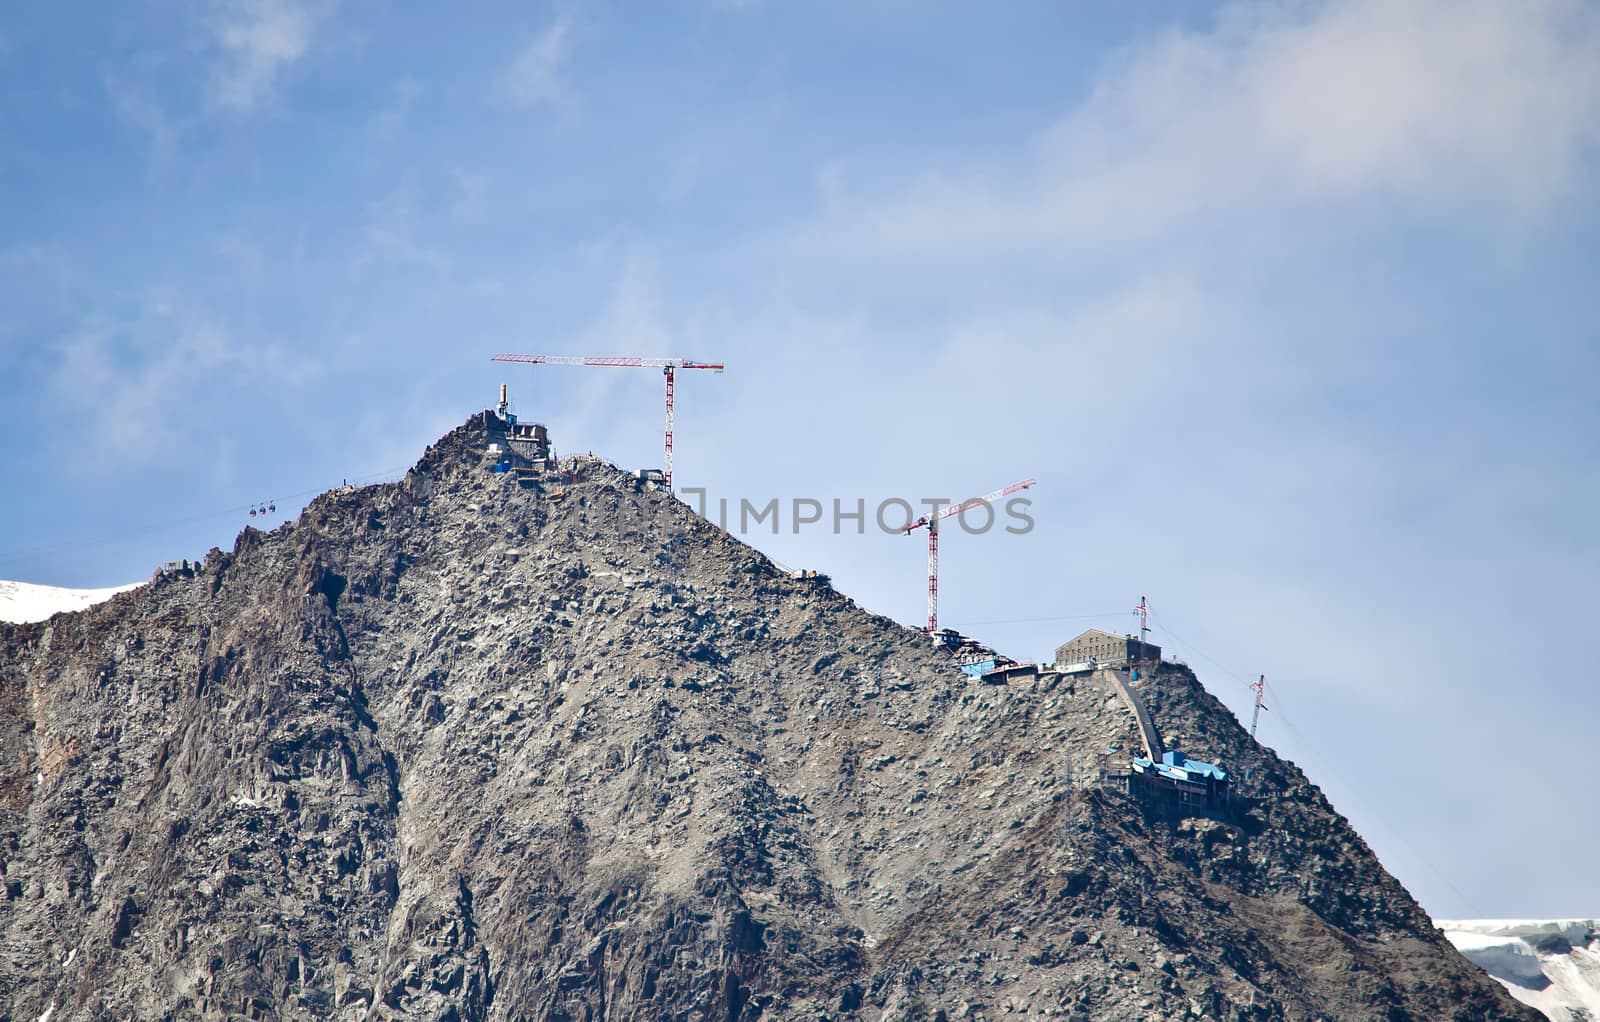 Cranes and building equipment on top of a mountain for high altitude construction